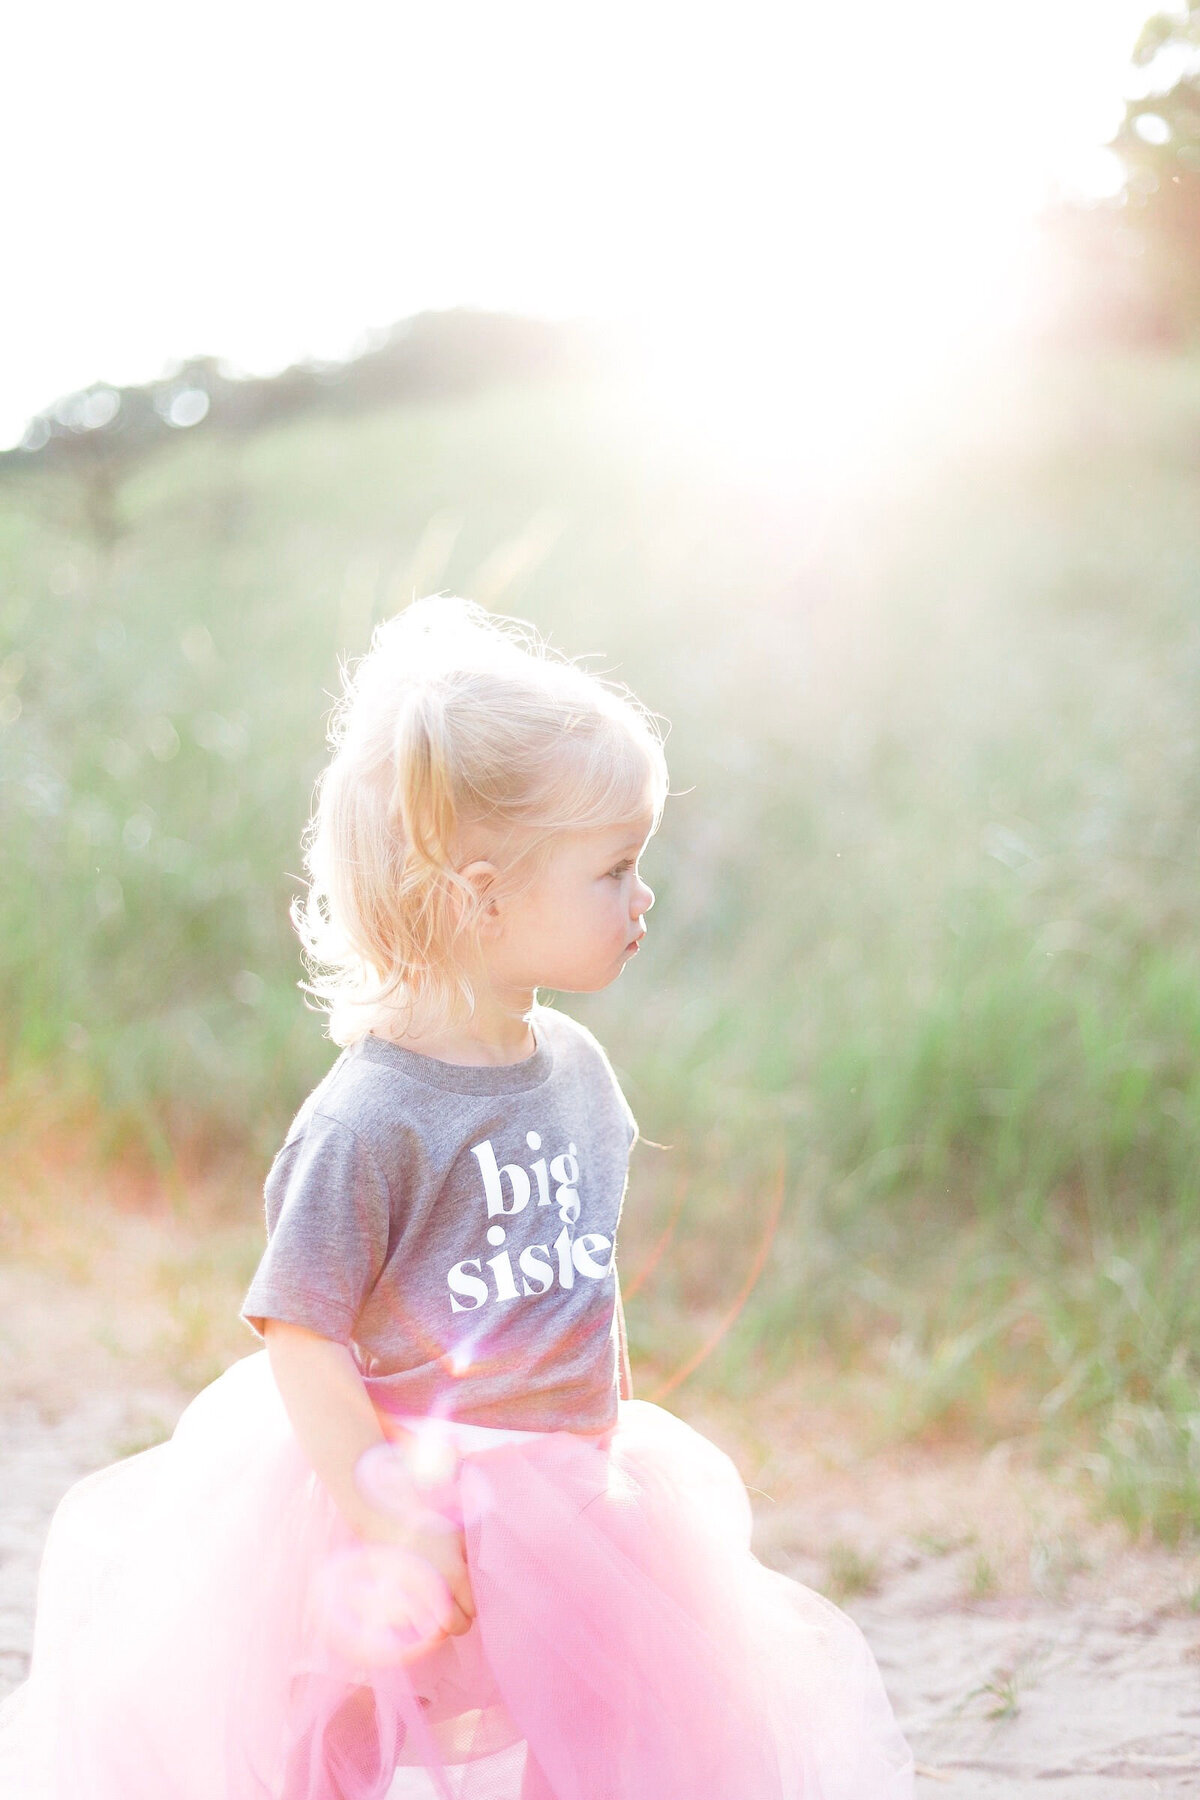 little girl with a big sister shirt standing in the sunlight